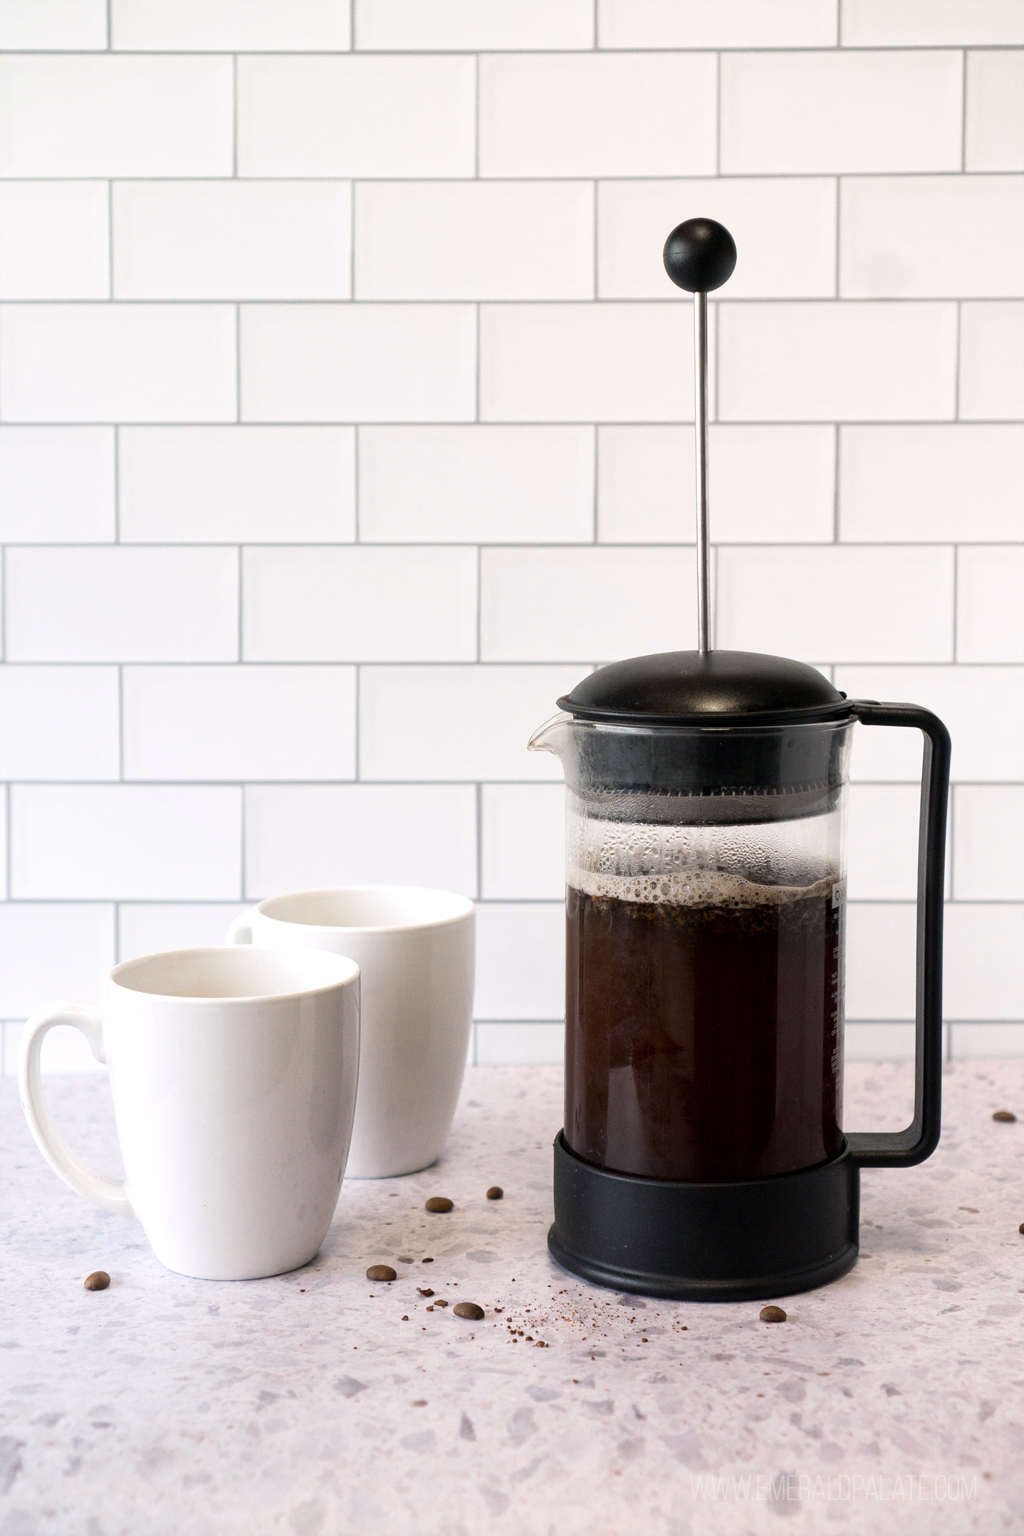 https://www.emeraldpalate.com/wp-content/uploads/2021/04/Best-Coffee-for-French-Press-French-press-and-cups-2-lowres2.jpg